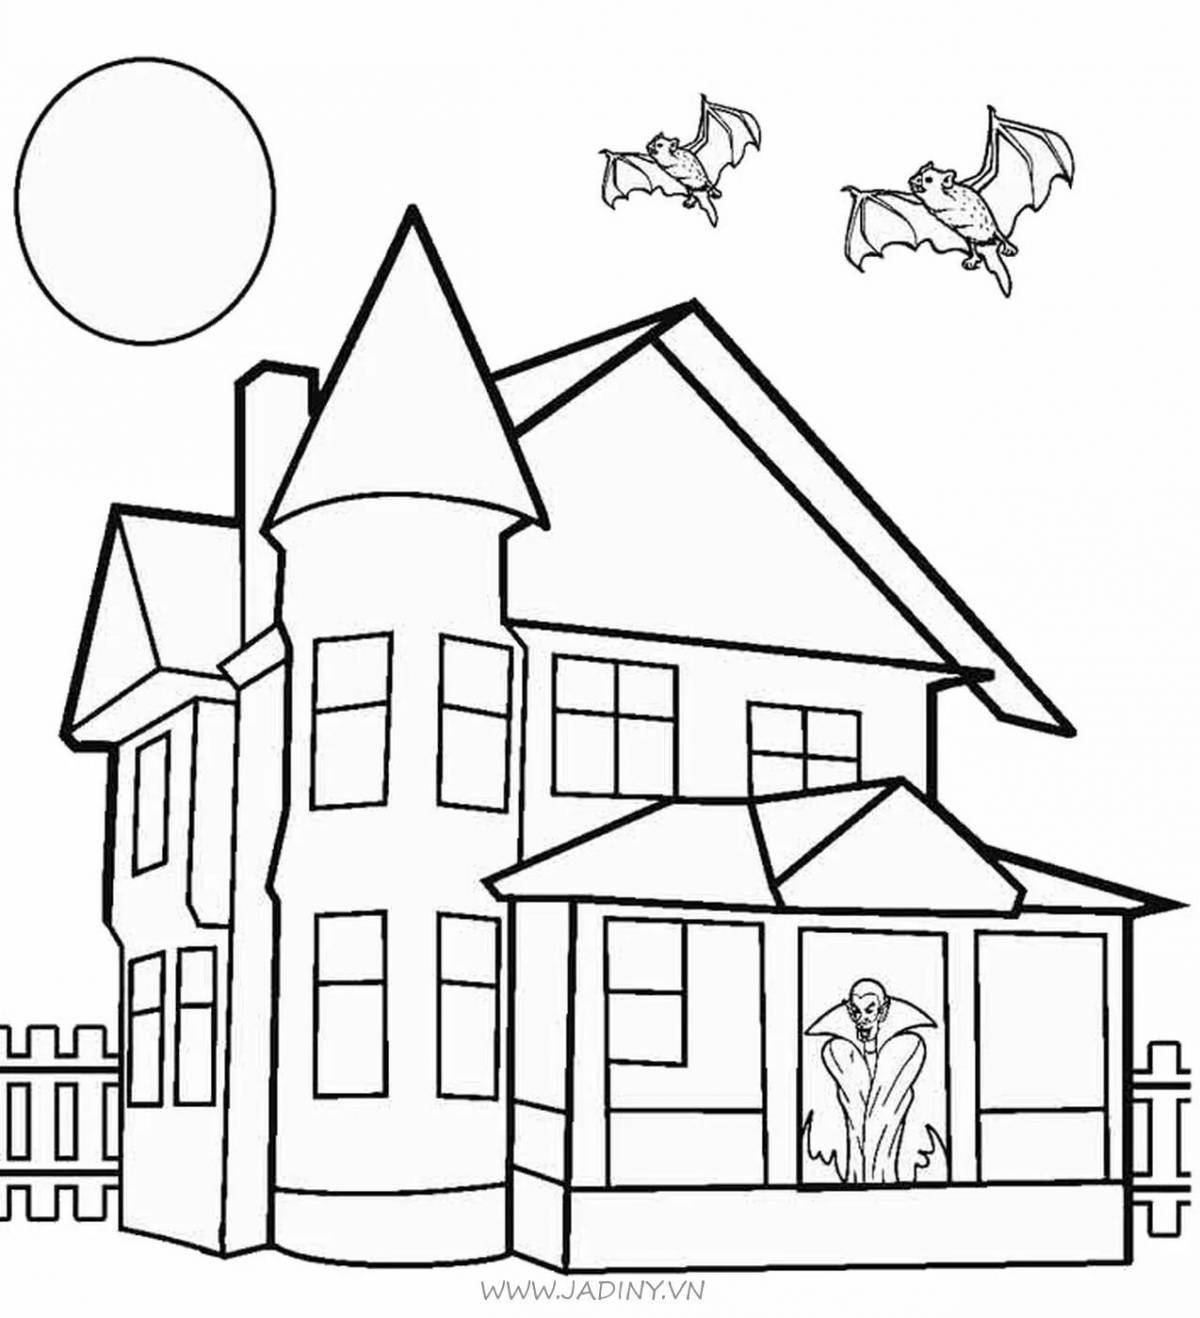 Coloring book exalted beautiful houses